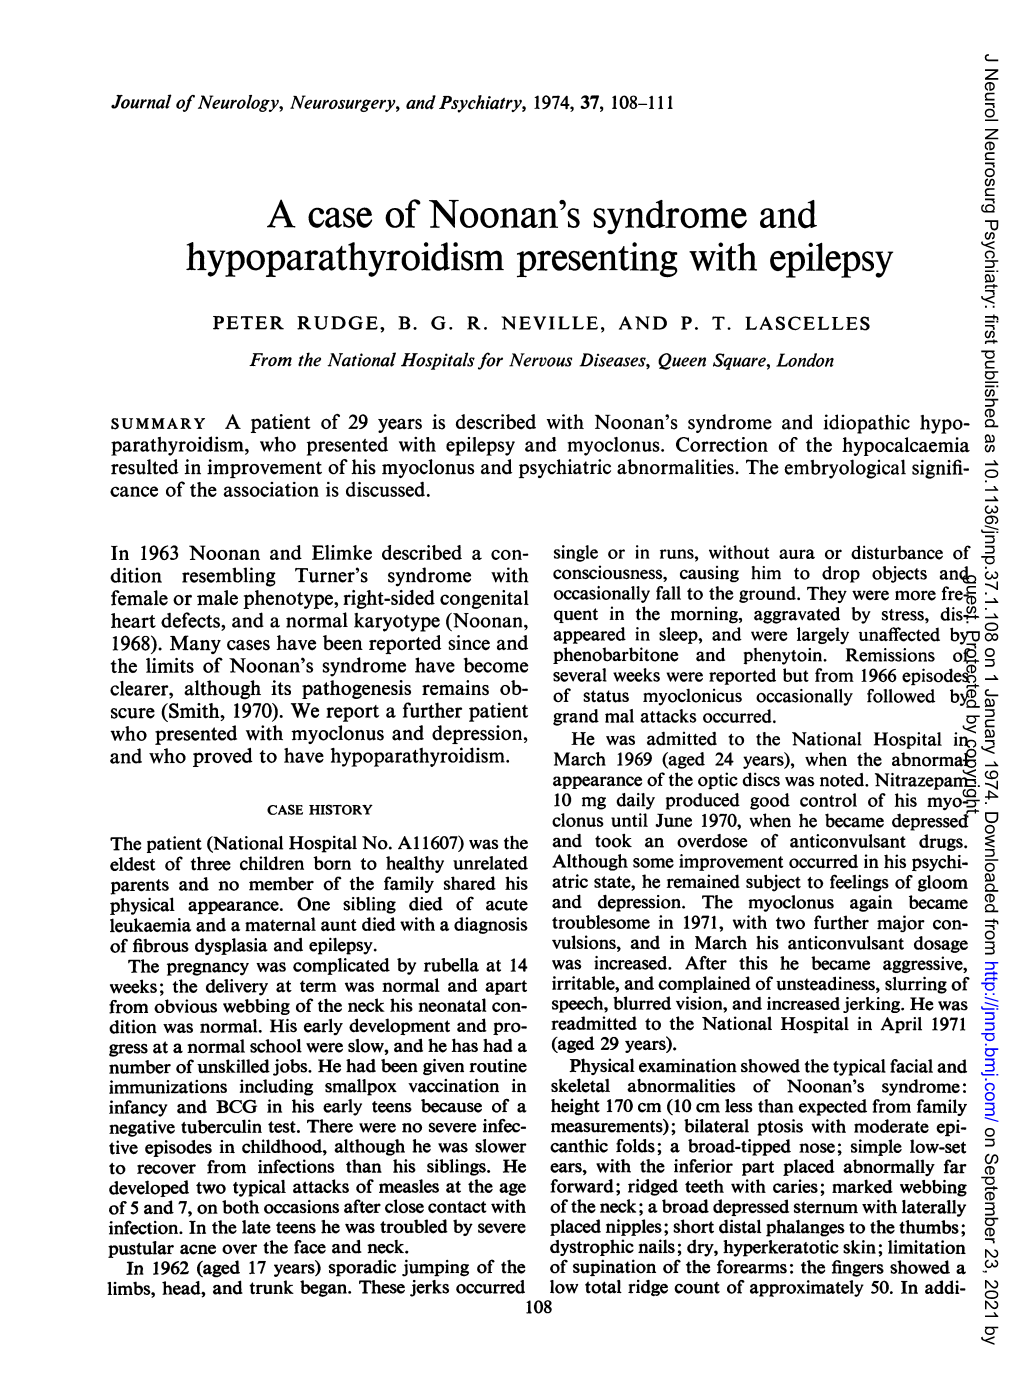 A Case of Noonan's Syndrome and Hypoparathyroidism Presentingwith